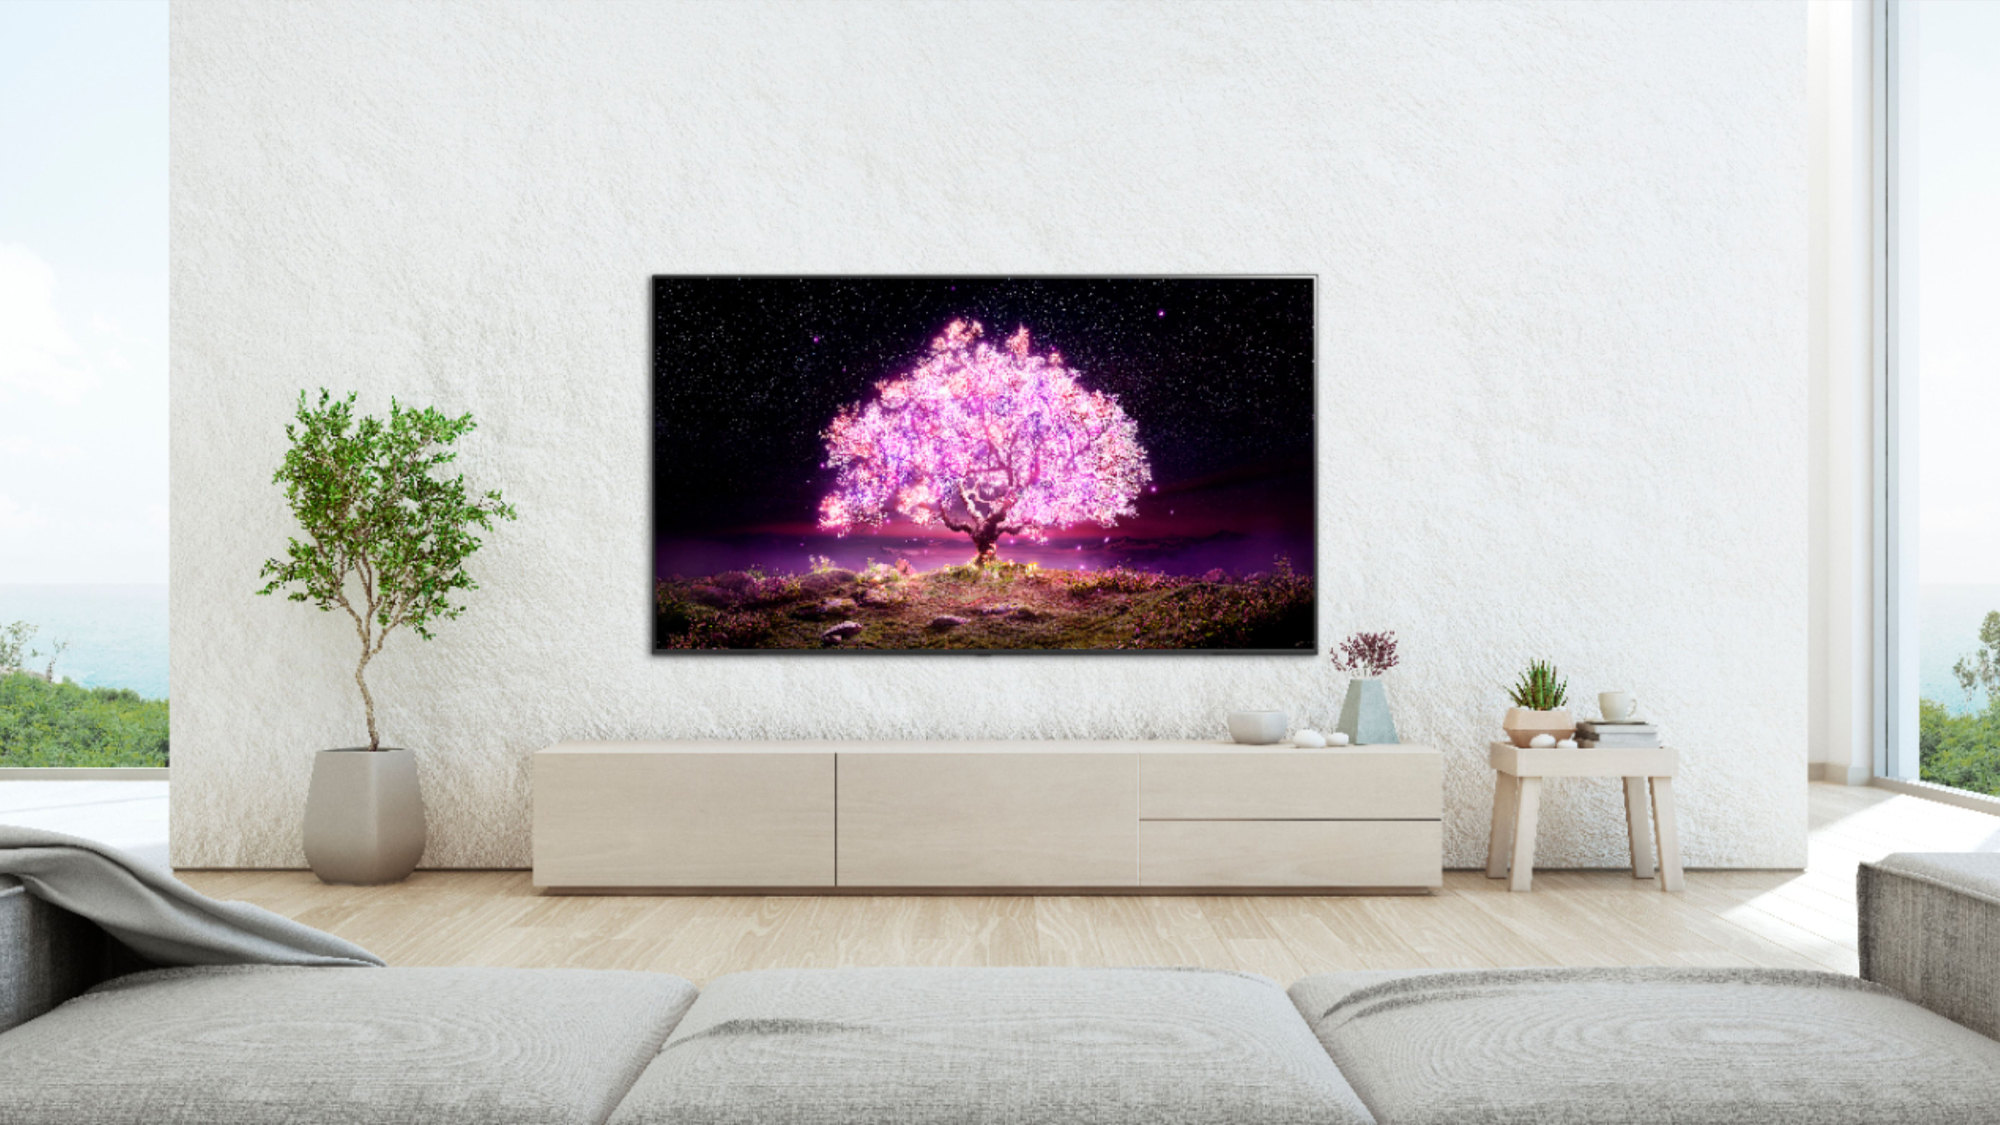 LG C1 OLED review: this 2021 OLED TV is still one of the best | Tom's Guide